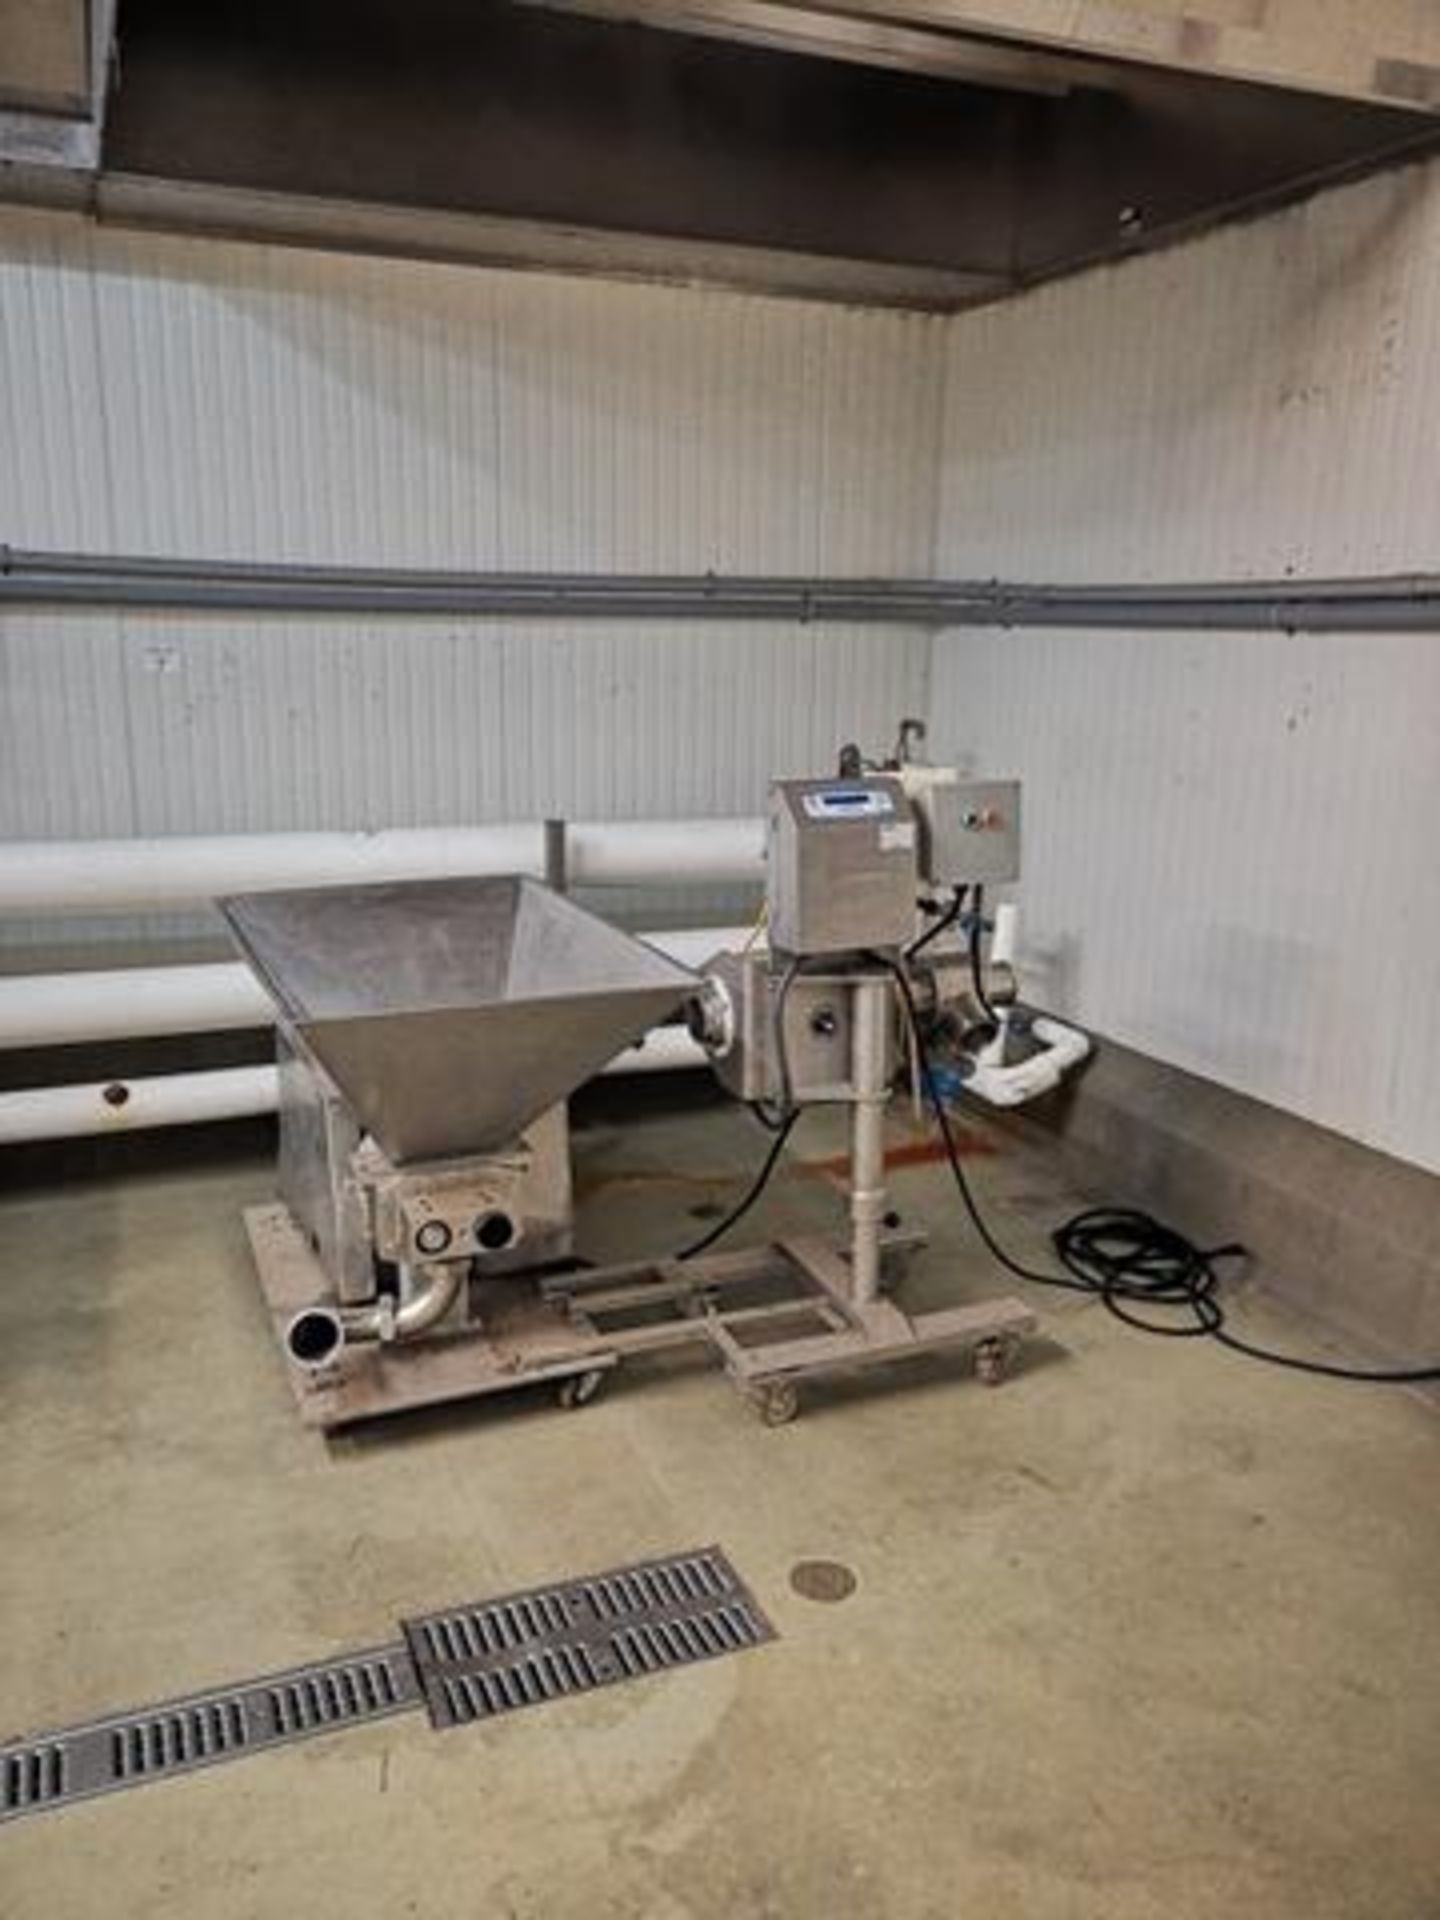 LOMA, IQ2, STAINLESS STEEL, PIPELINE, METAL DETECTOR, 4", 2003, S/N QP12033 WITH MEAT PUMP, 4.5" - Image 3 of 3